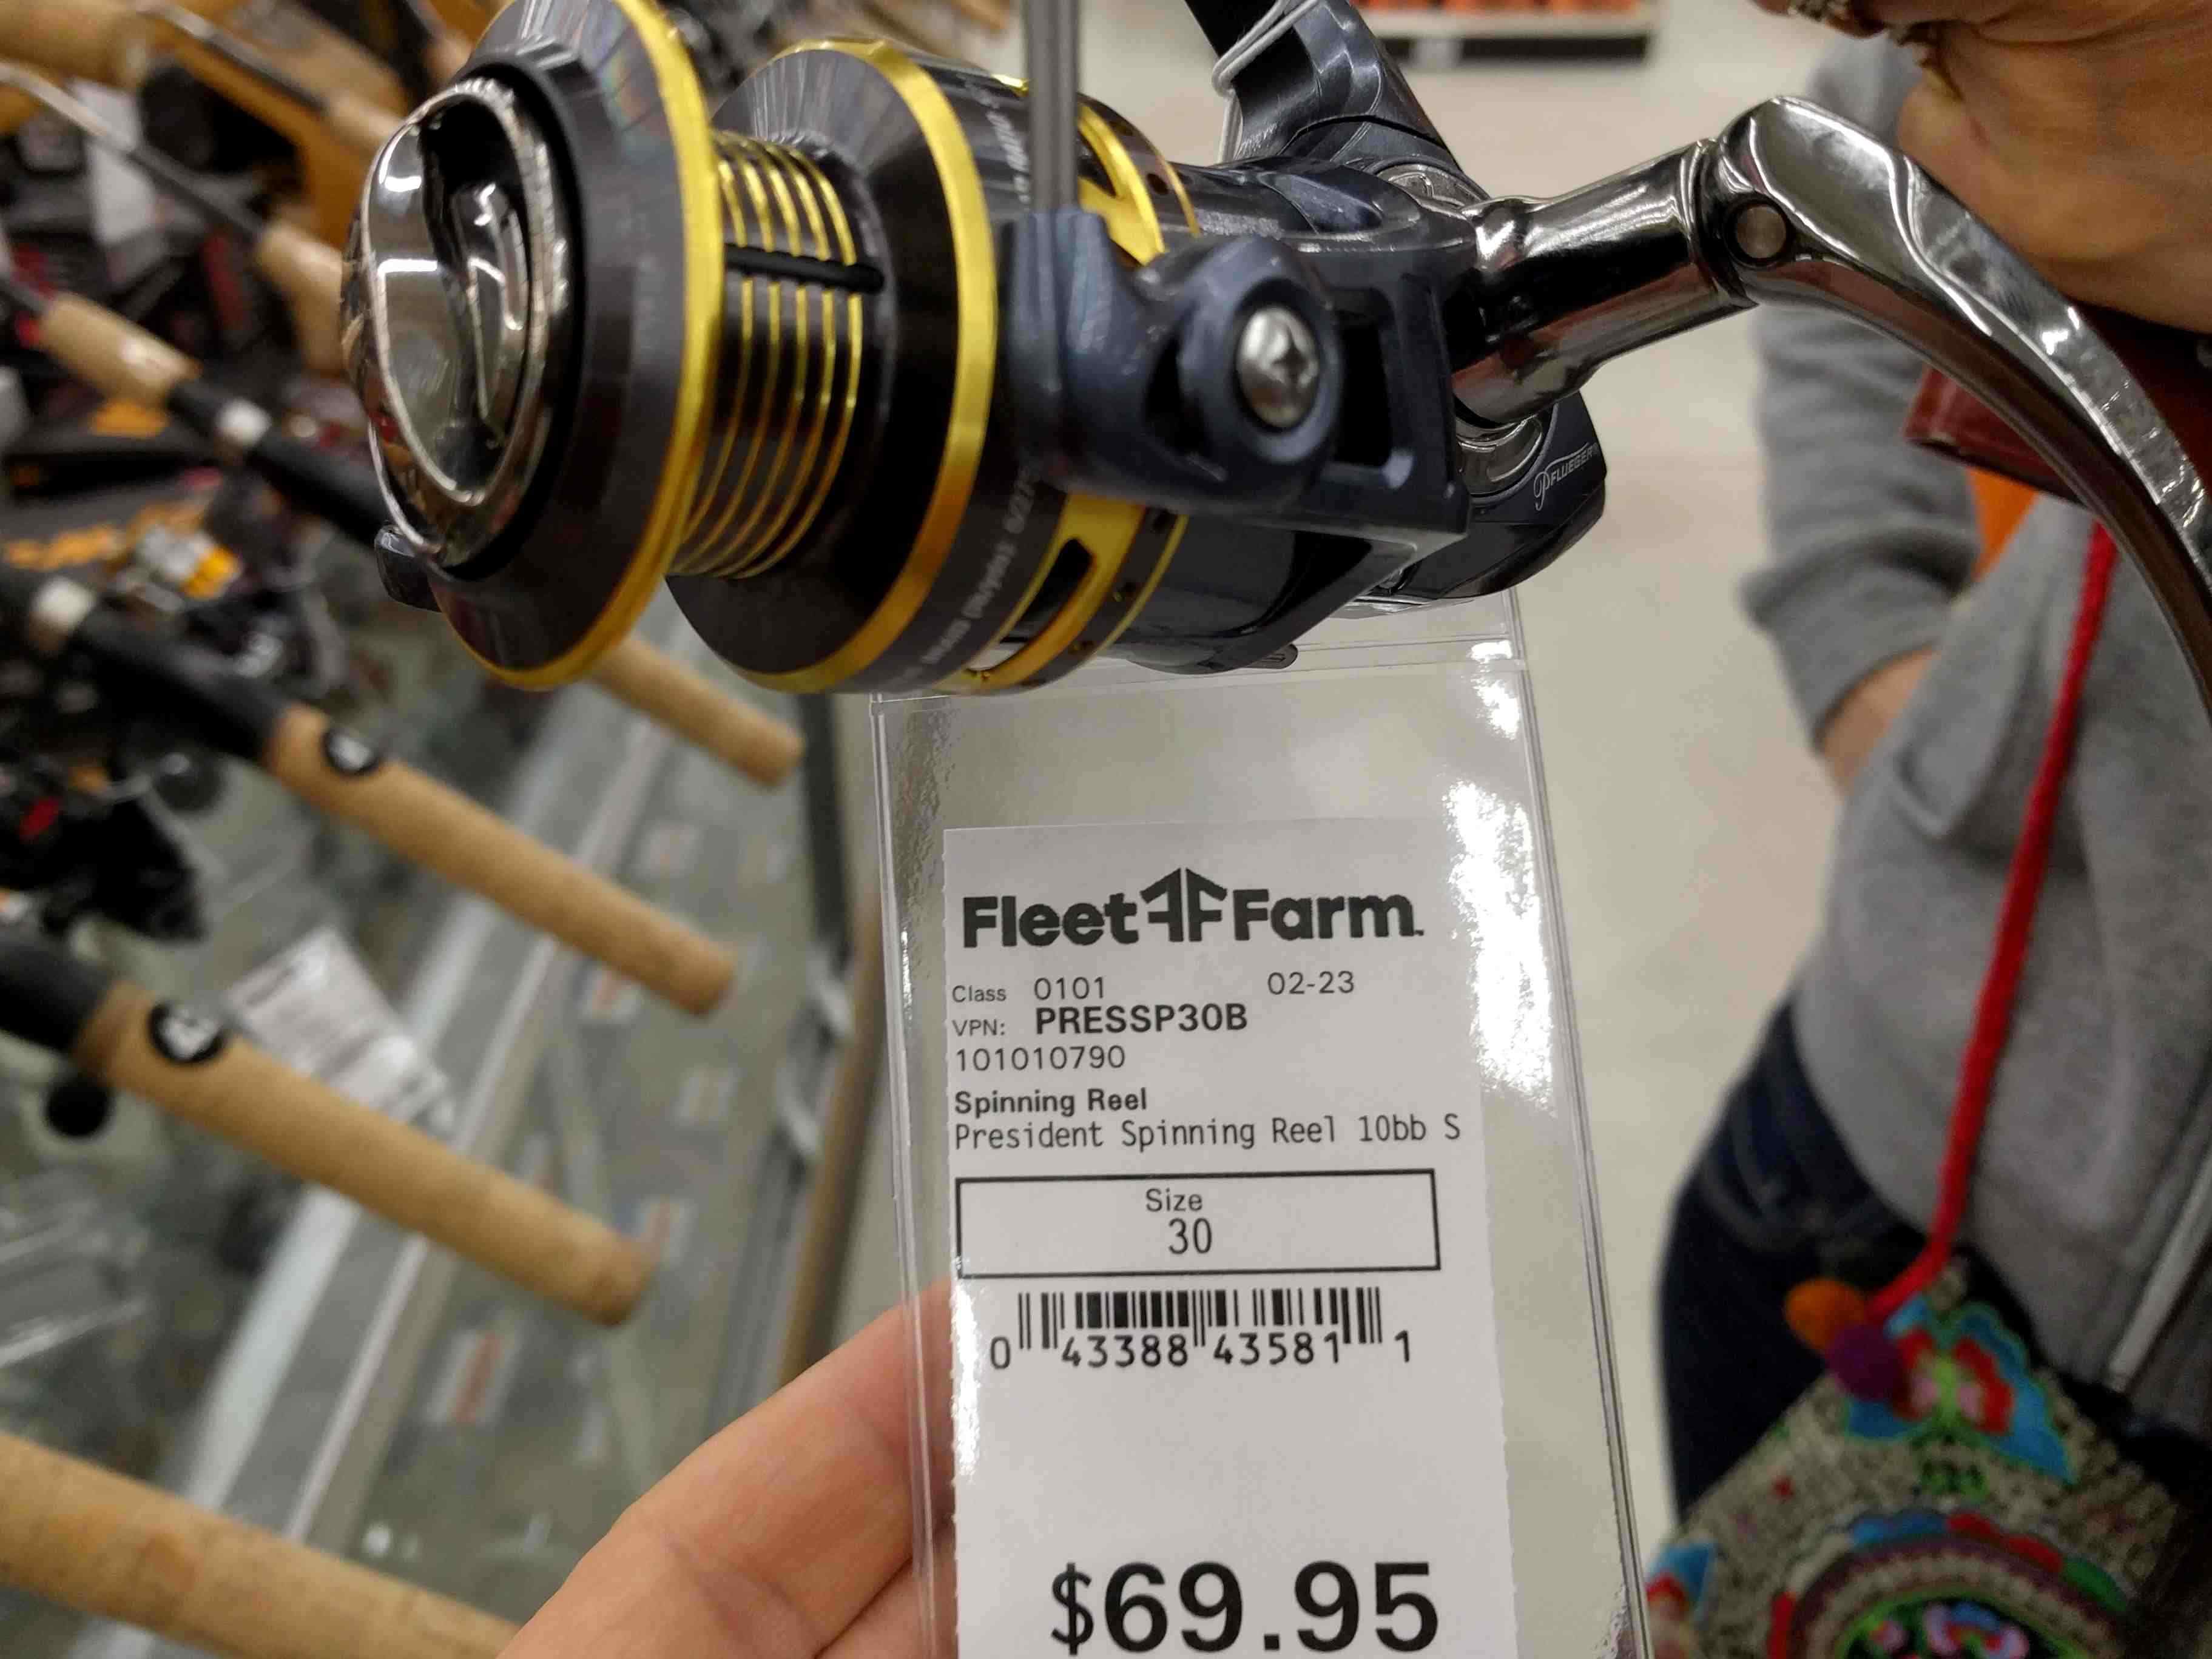 Was wondering anyone order off  here?Why are the prices of rods and  reels always WAY cheaper then anyone else? I have been too scared to risk  getting a knock off brand